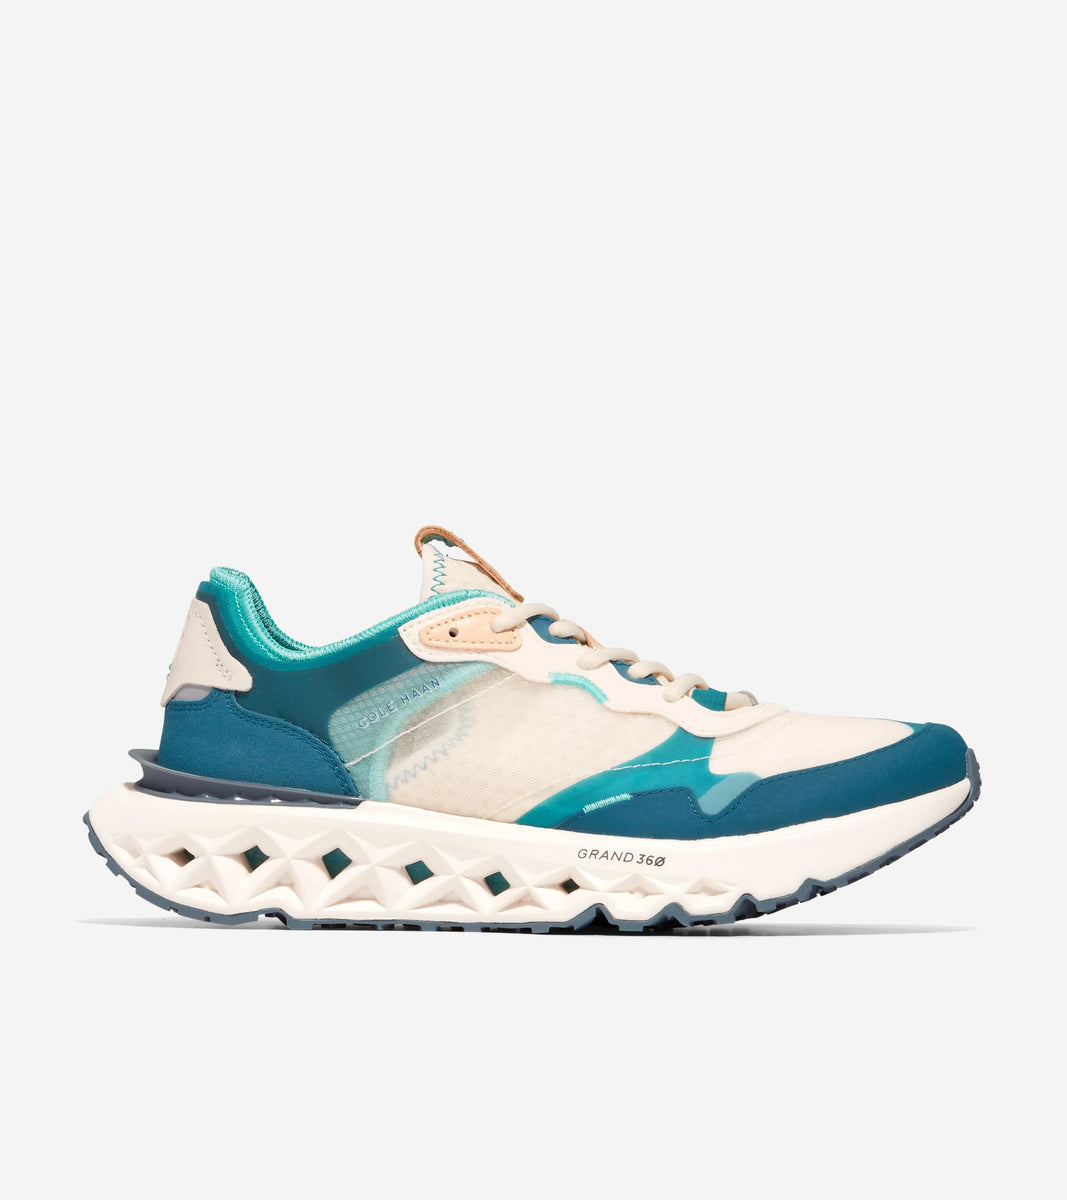 C36570:DEEP LAKE/MOROCCAN BLUE/IVORY Tenis 5.ZERØGRAND Running Shoe Hombre | Cole Haan Colombia